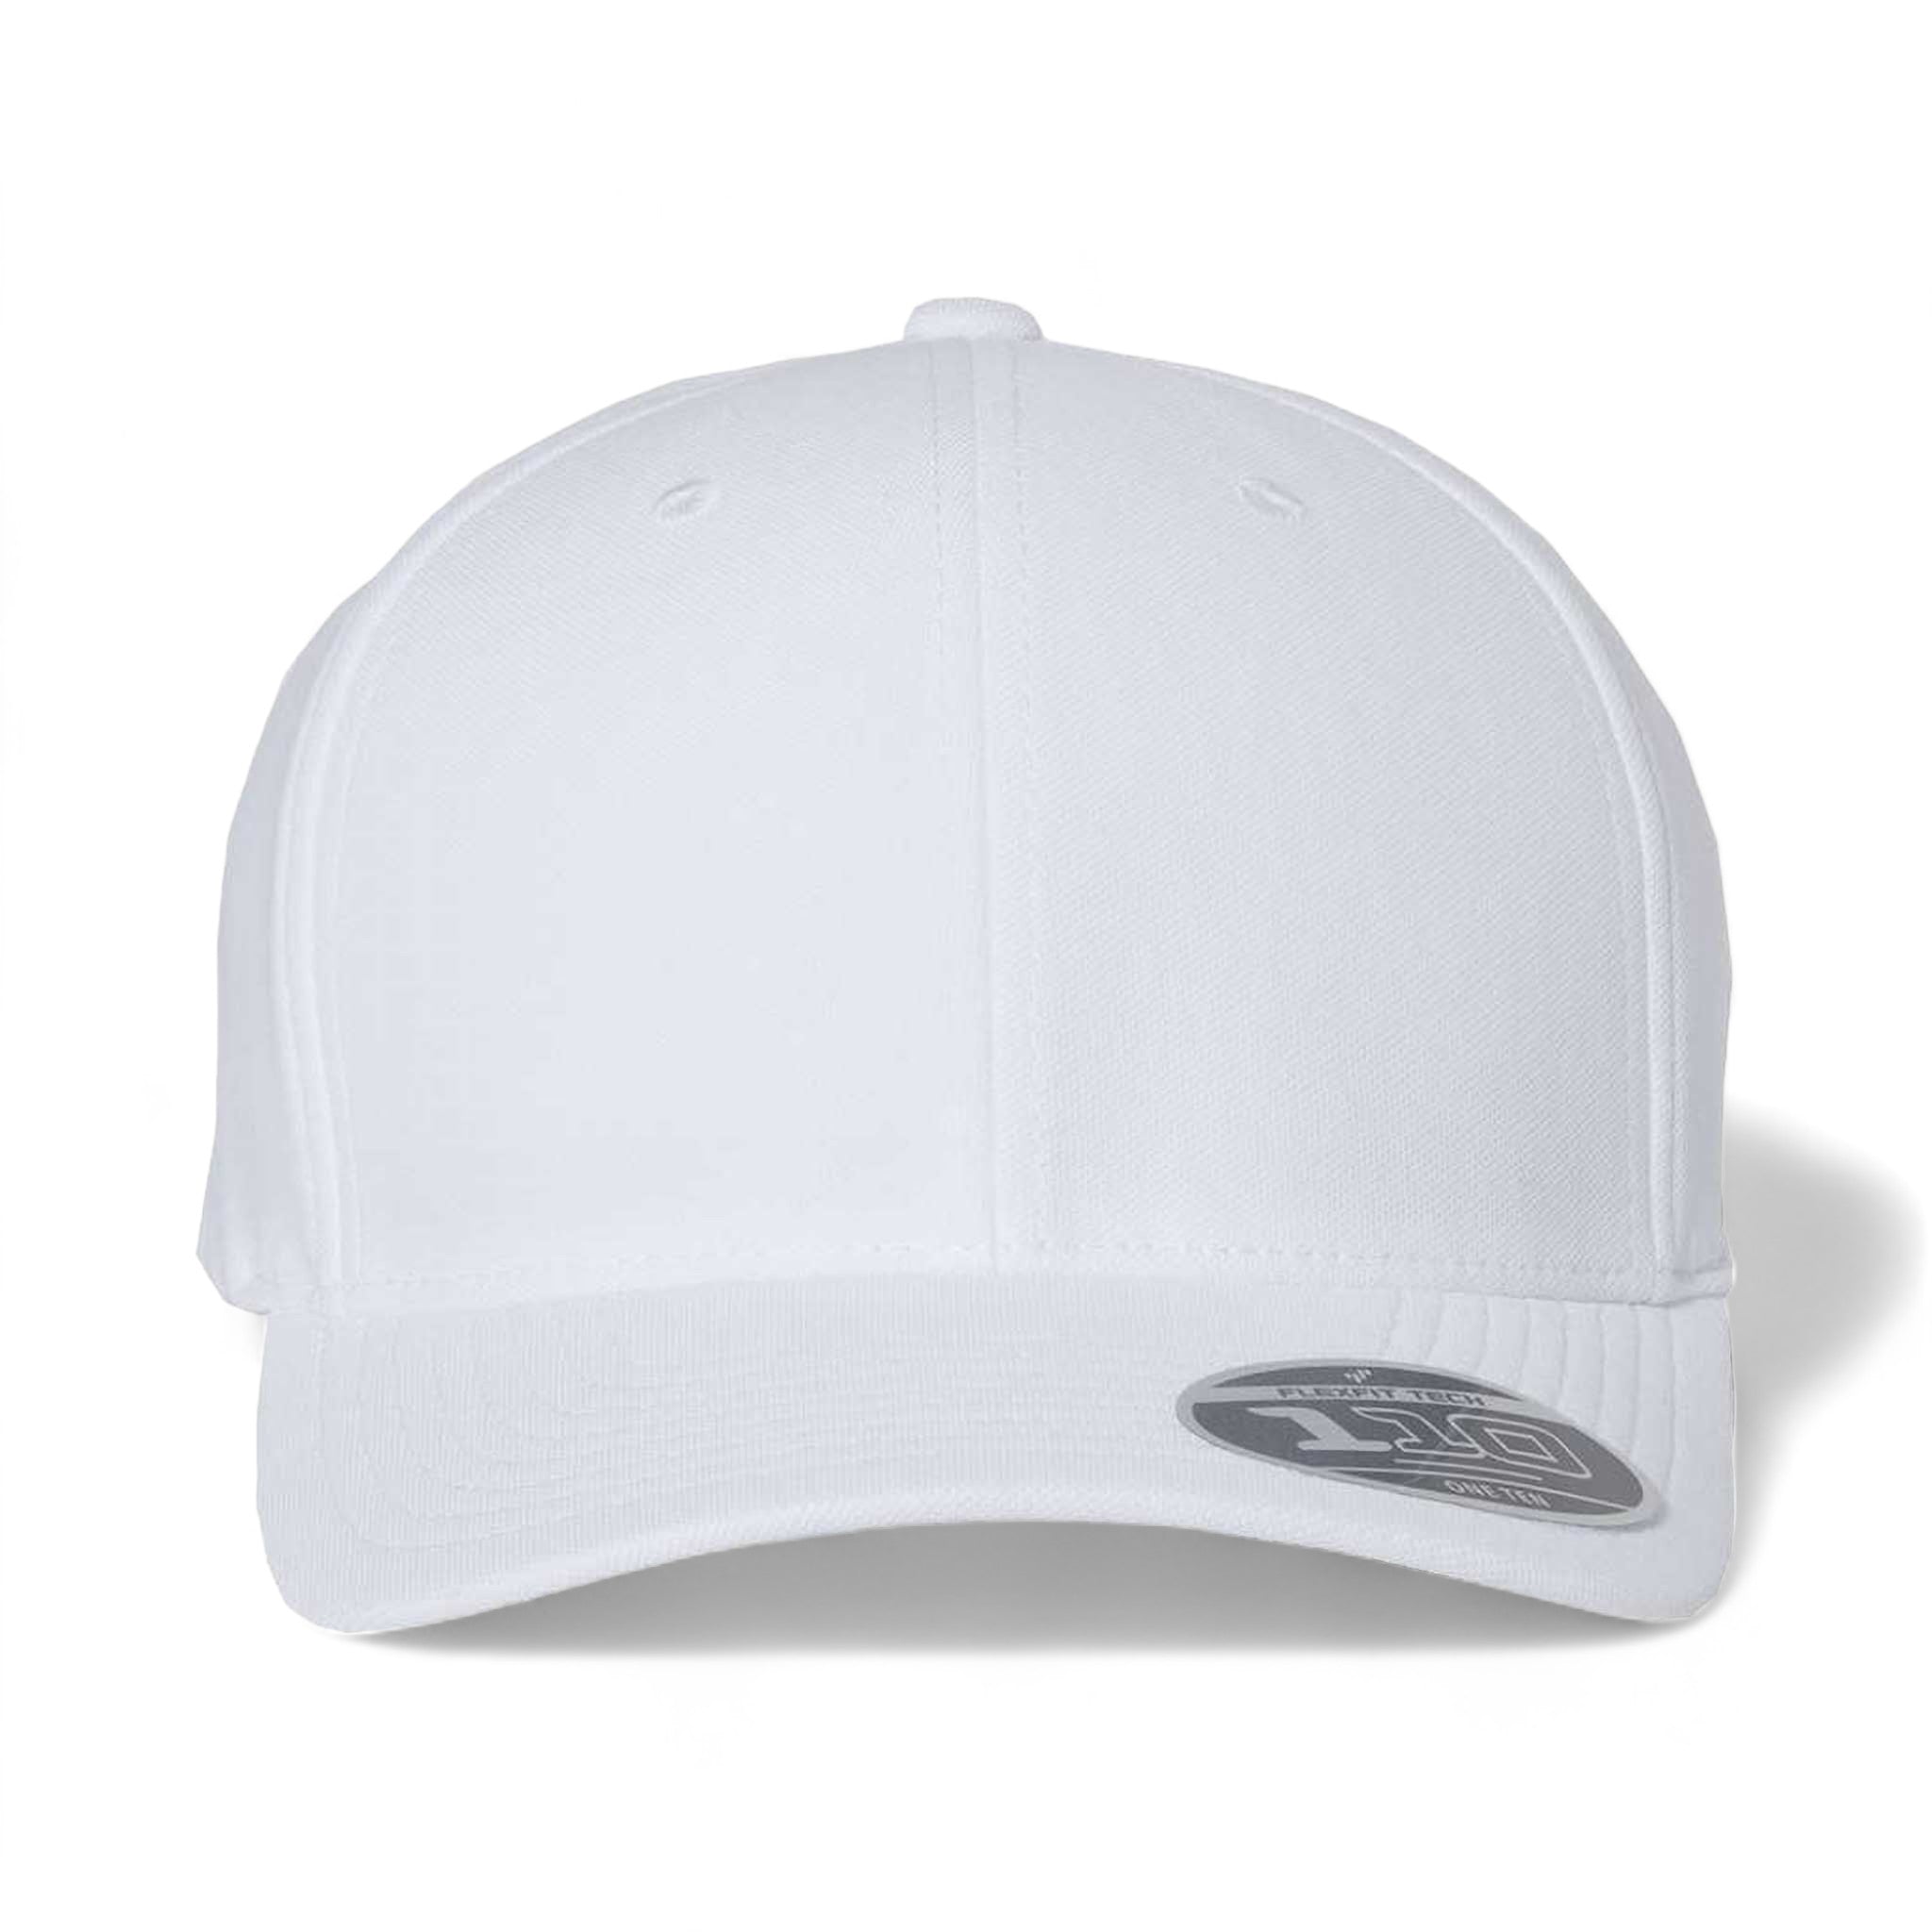 Front view of Flexfit 110P custom hat in white